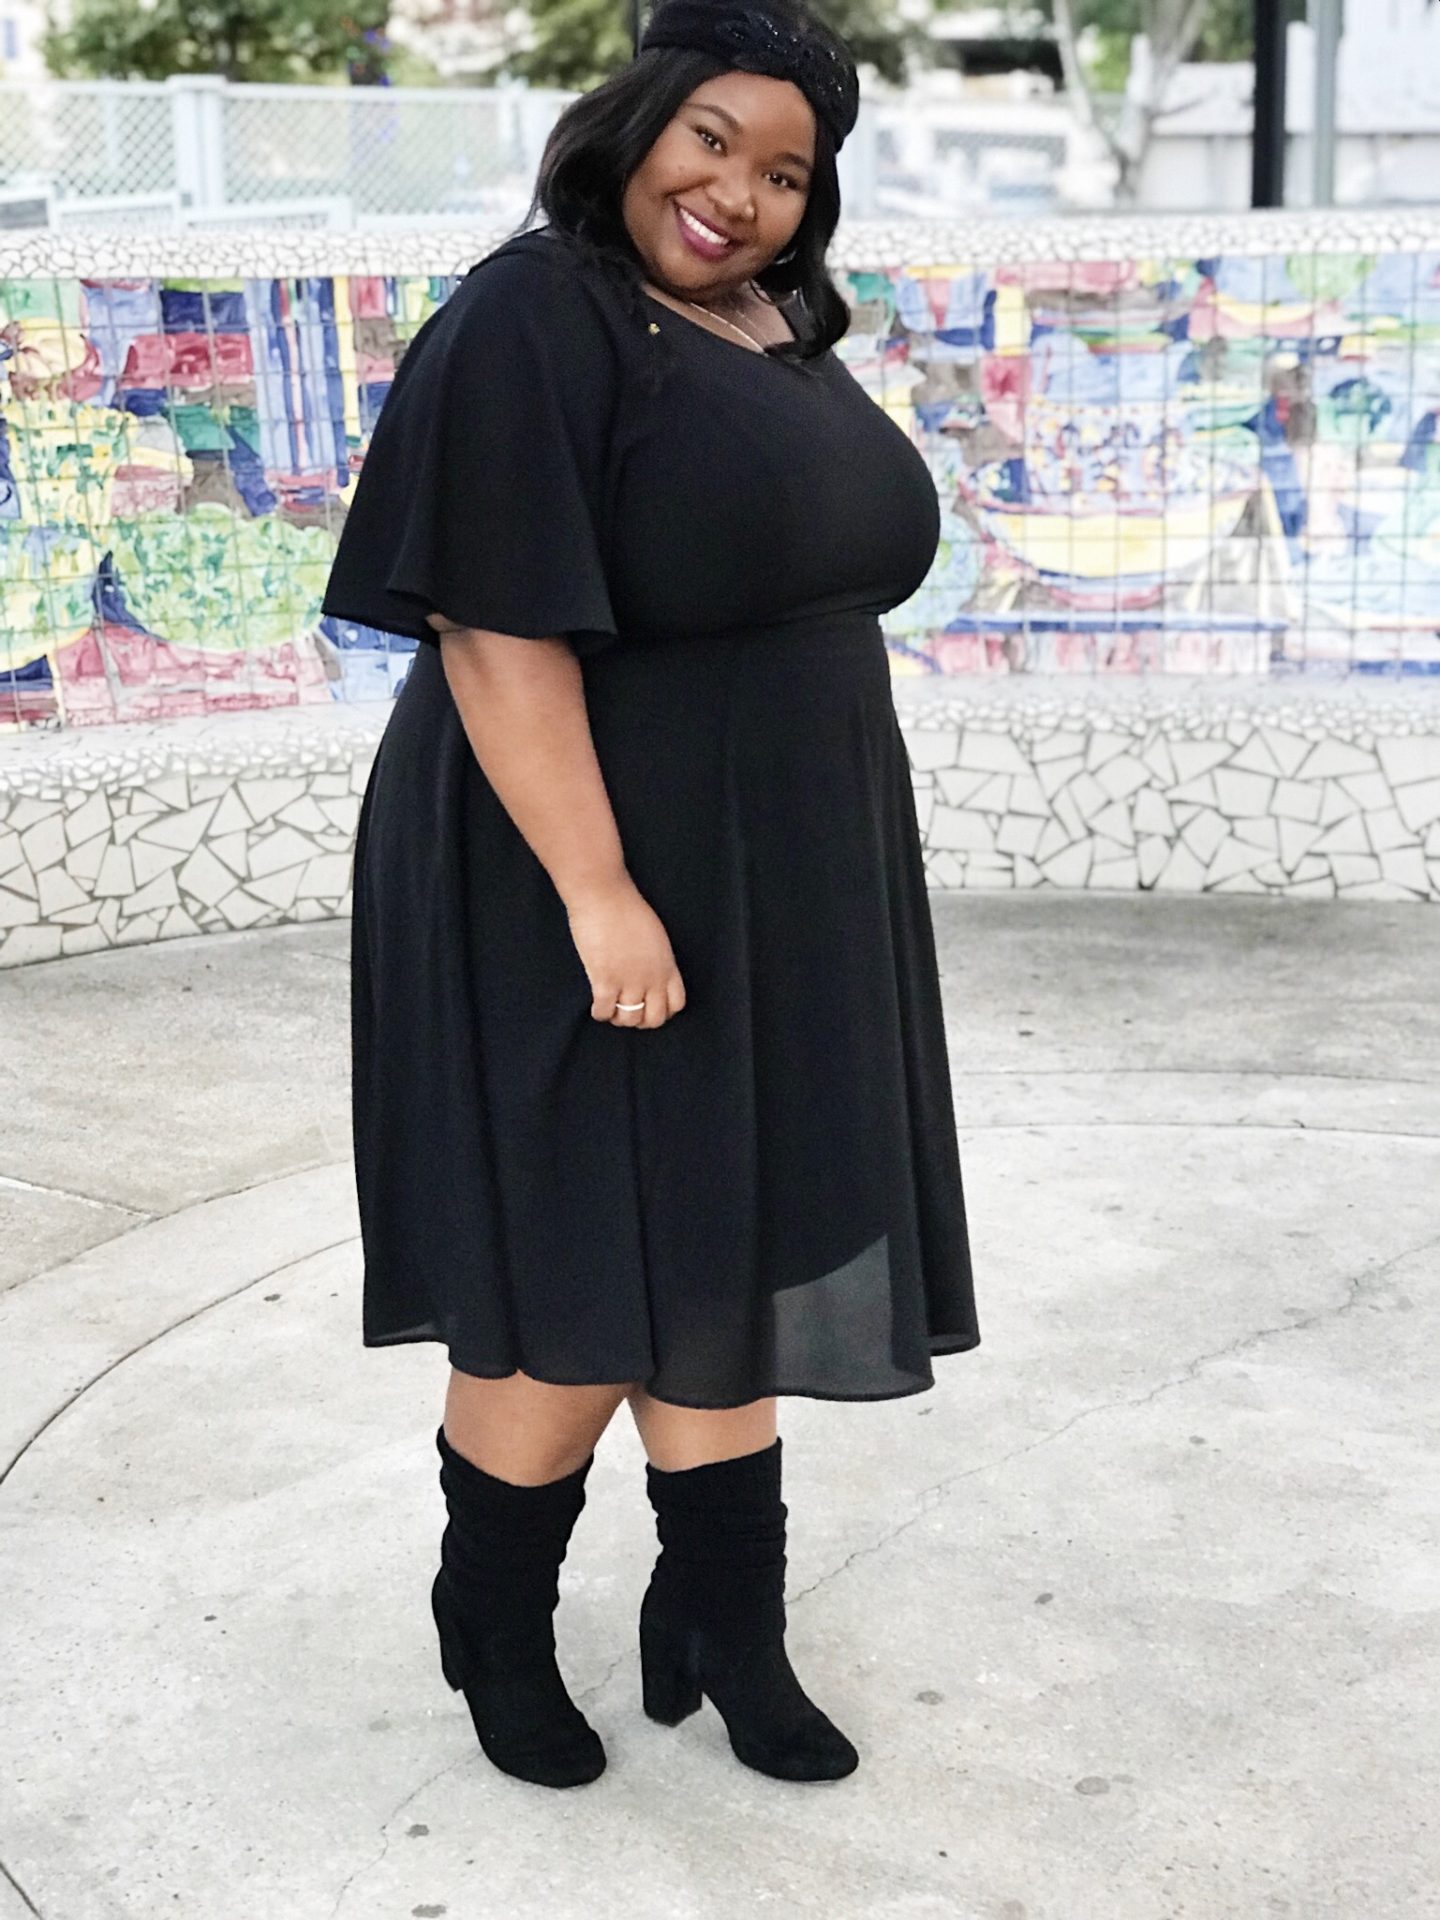 Turning My Back In Fear - A plus size fashion blog